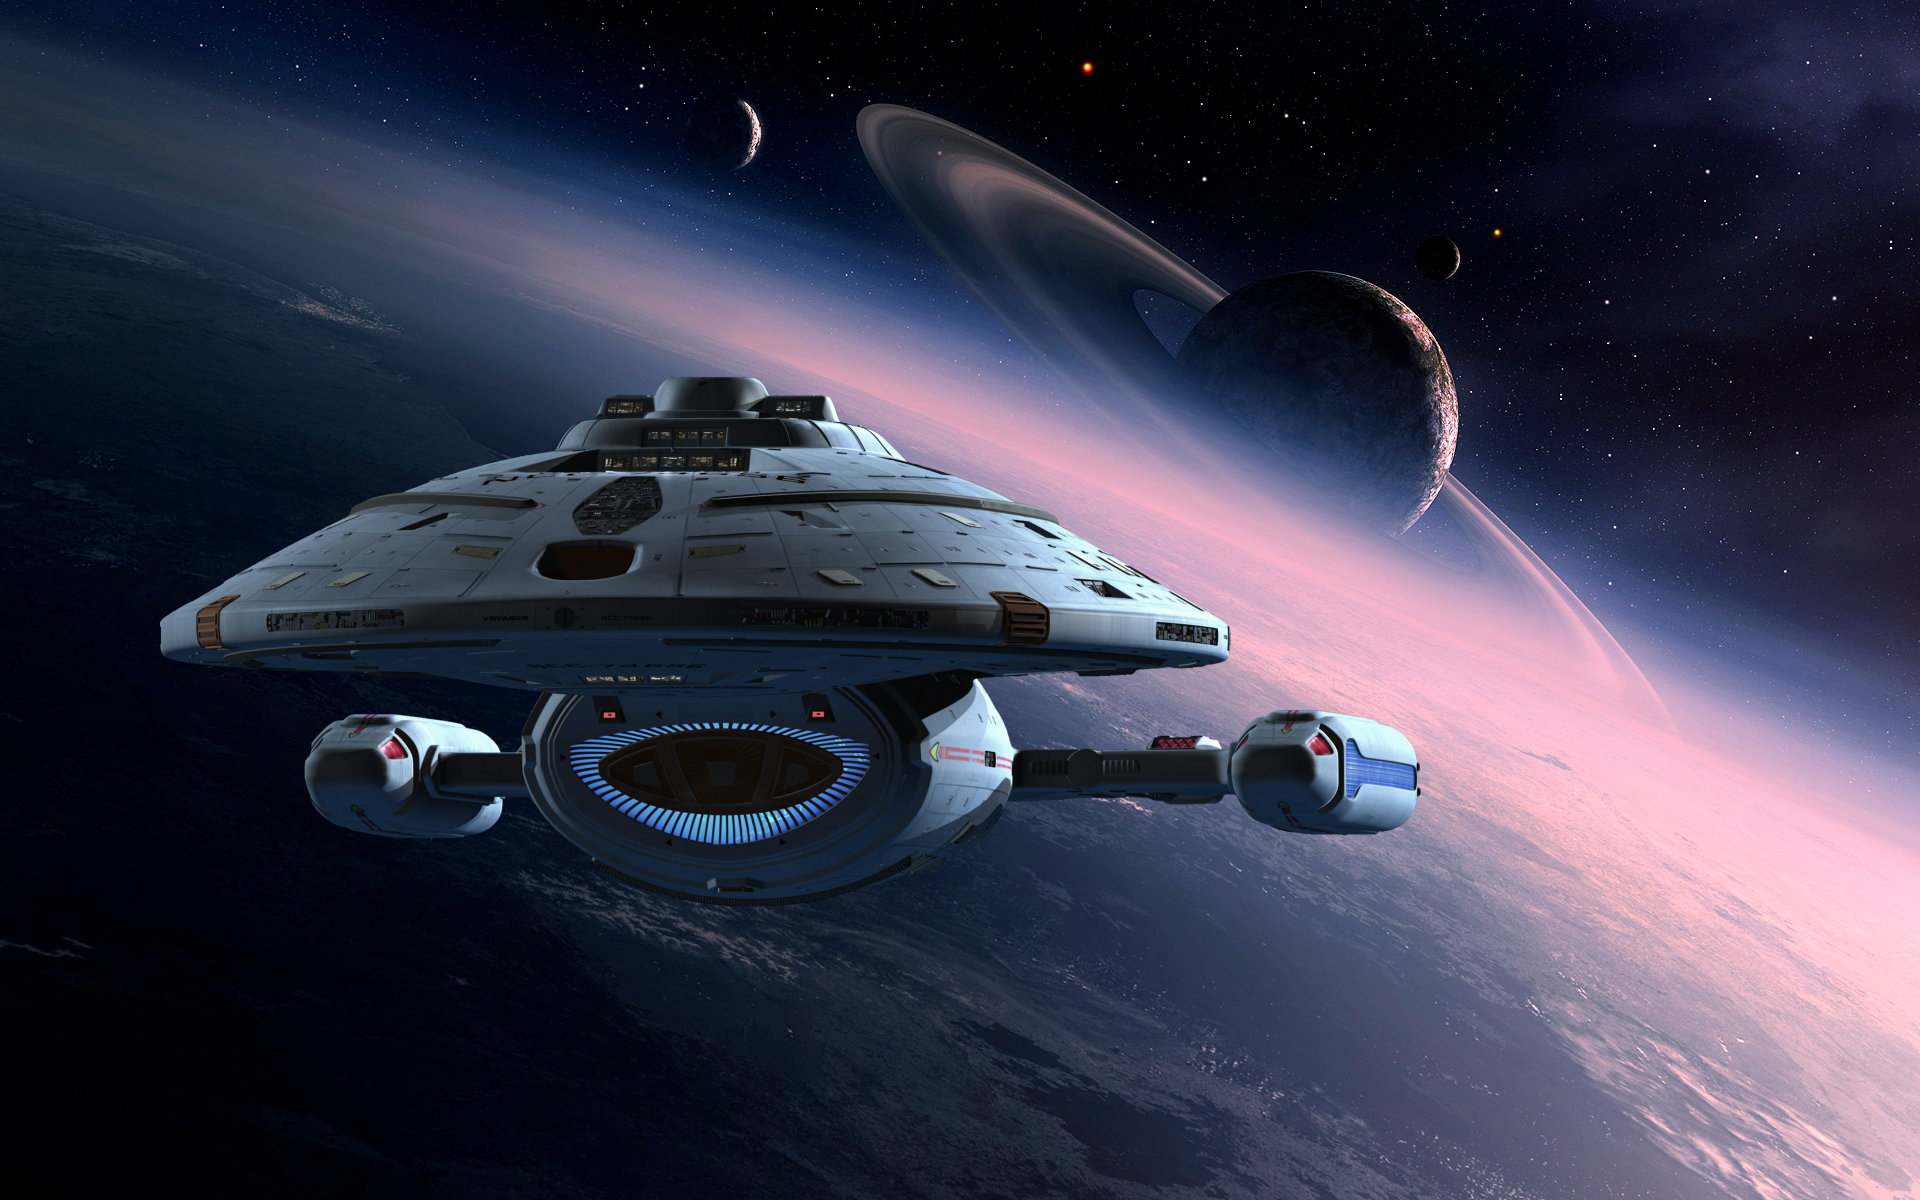 18 Star Trek Voyager HD Wallpapers Backgrounds - Wallpaper Abyss